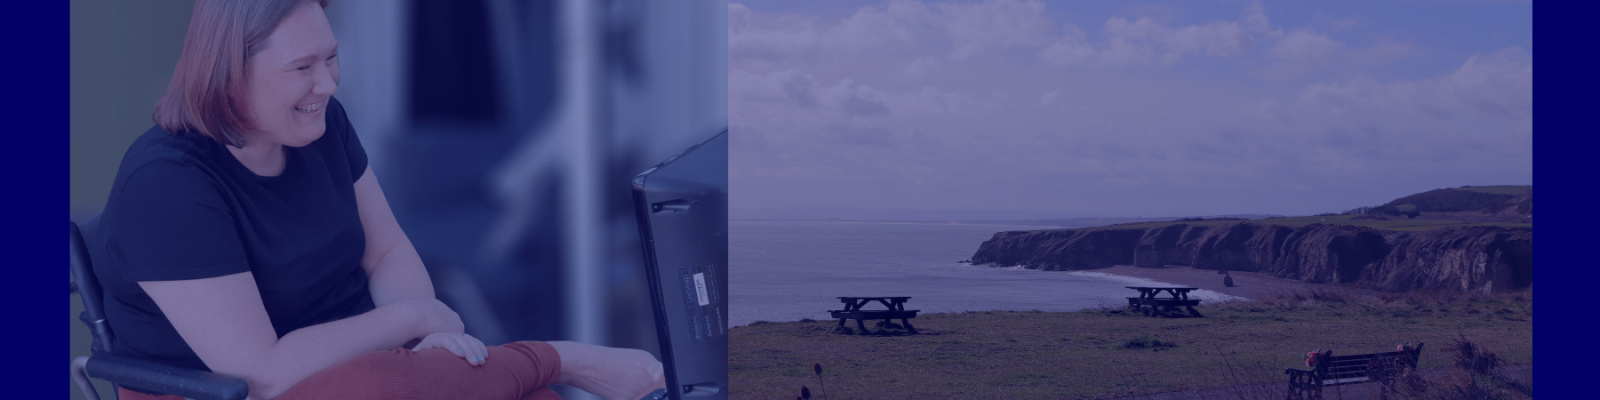 image of a smiling woman sat in a wheelchair, facing a computer monitor, next to an image of a view of the sea. the whole image has a navy-blue filter over it